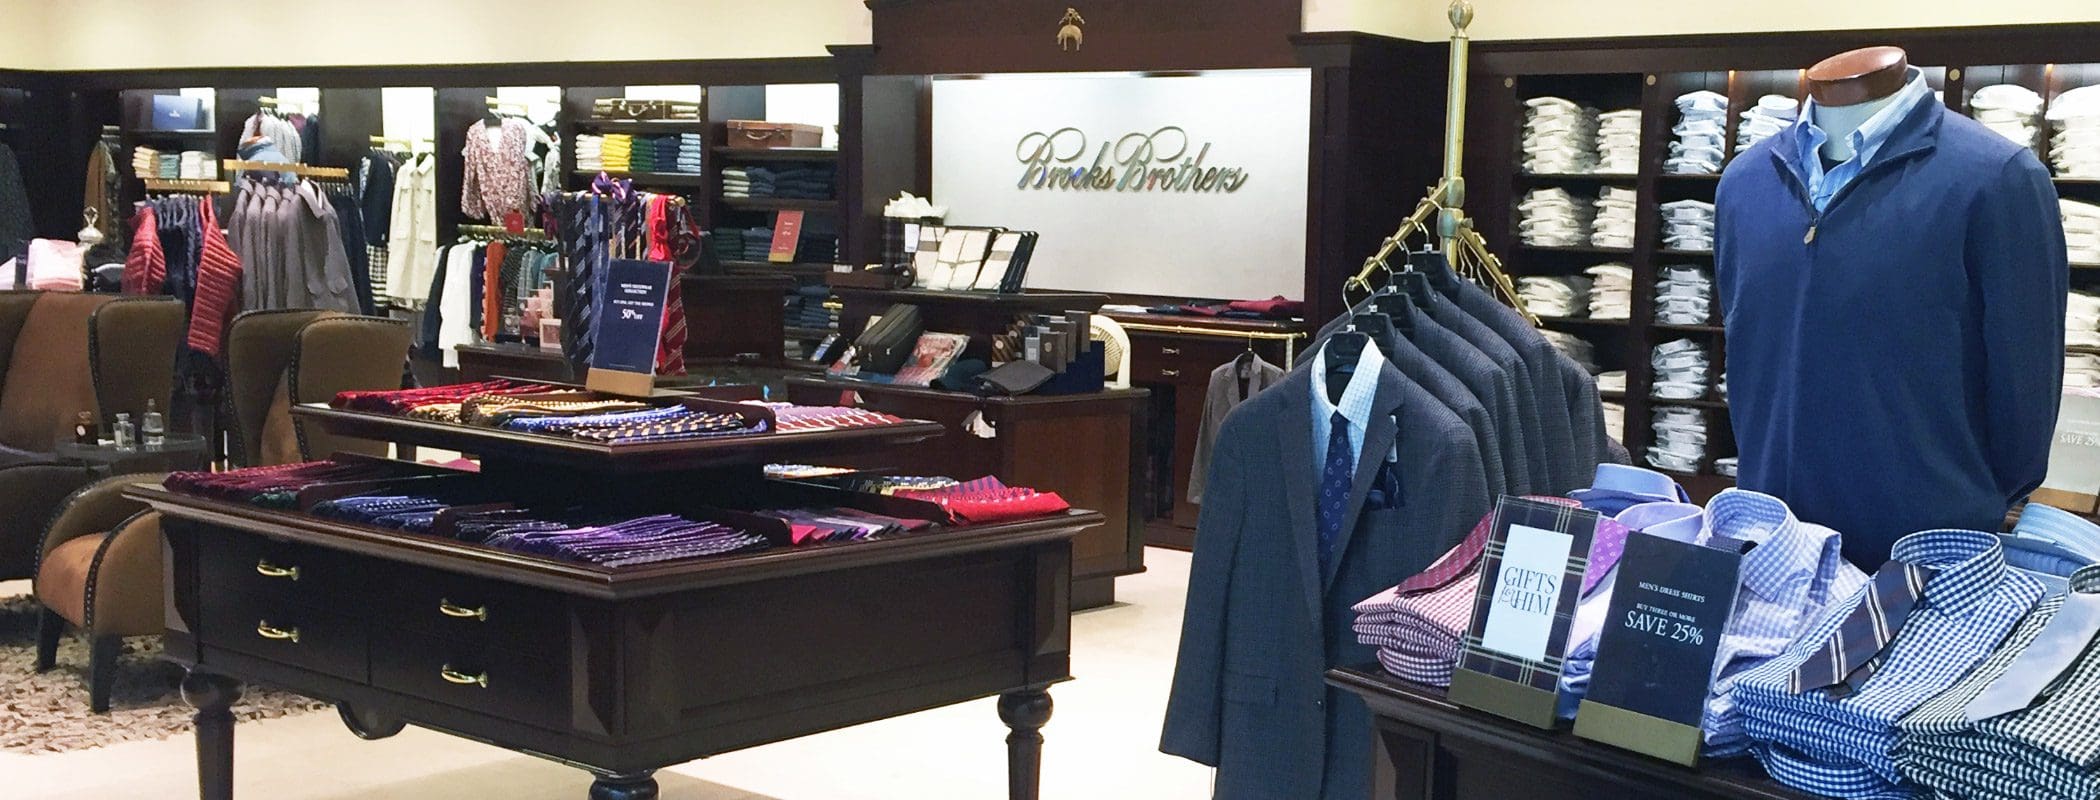 How Brooks Brothers Built Its Omnichannel World of Fashion Using SAP CAR